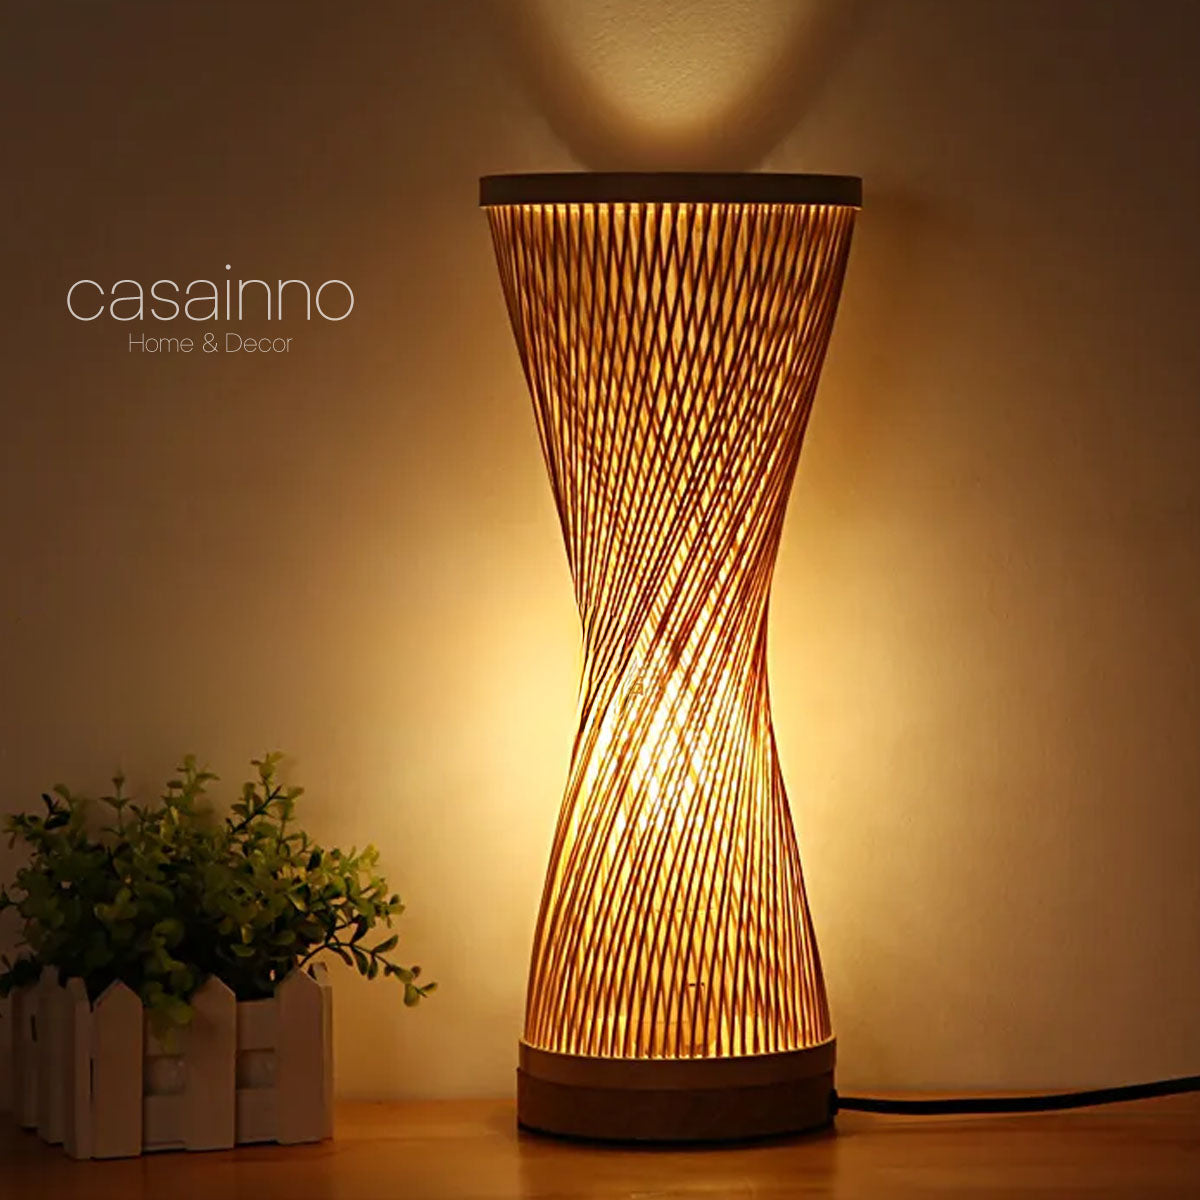 Table Lamp in Handwoven Bamboo